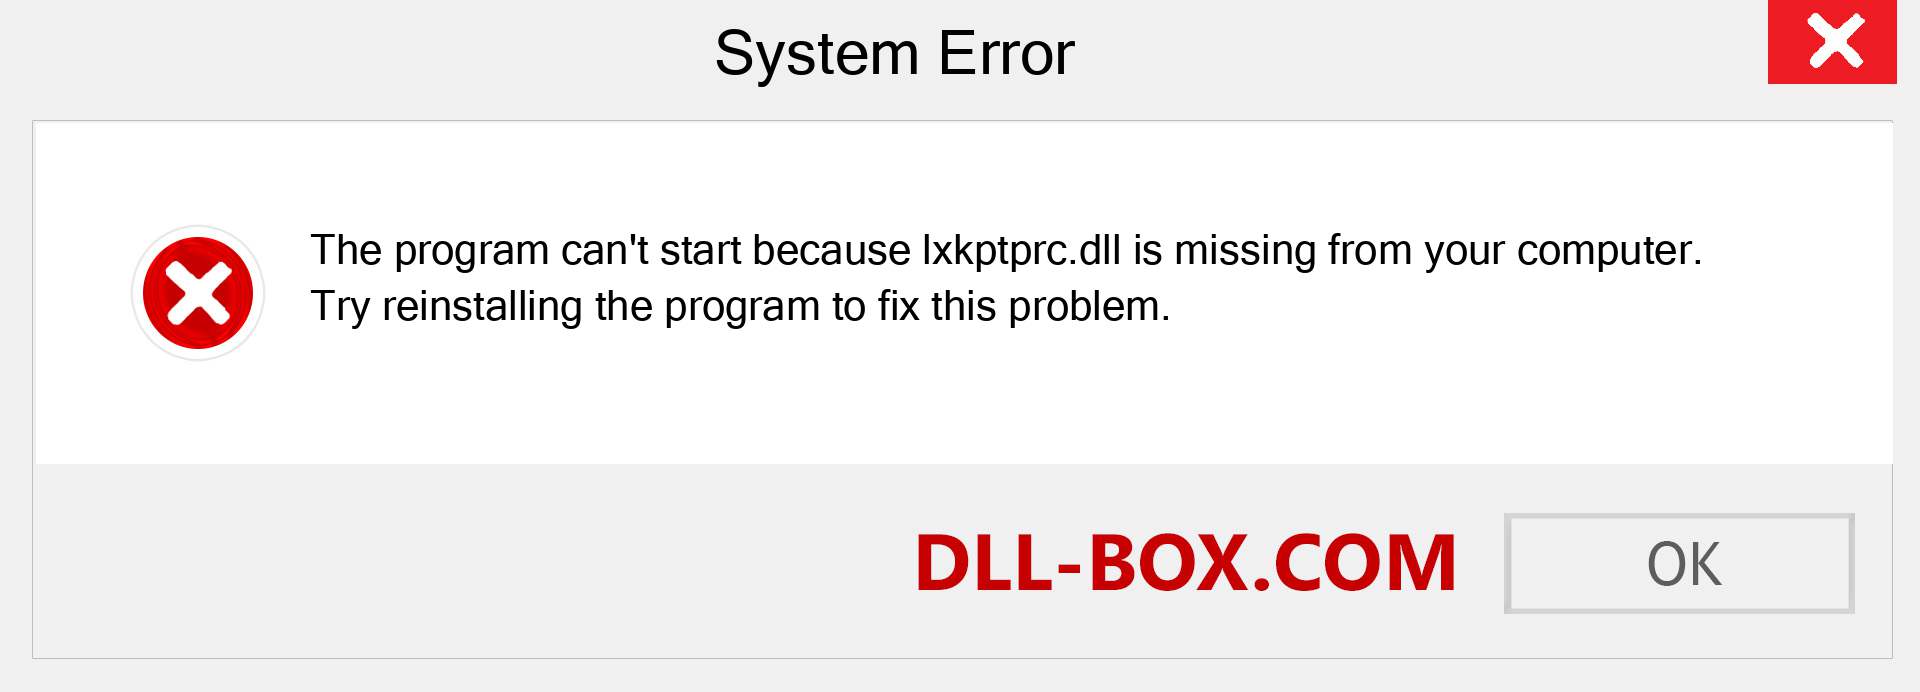  lxkptprc.dll file is missing?. Download for Windows 7, 8, 10 - Fix  lxkptprc dll Missing Error on Windows, photos, images